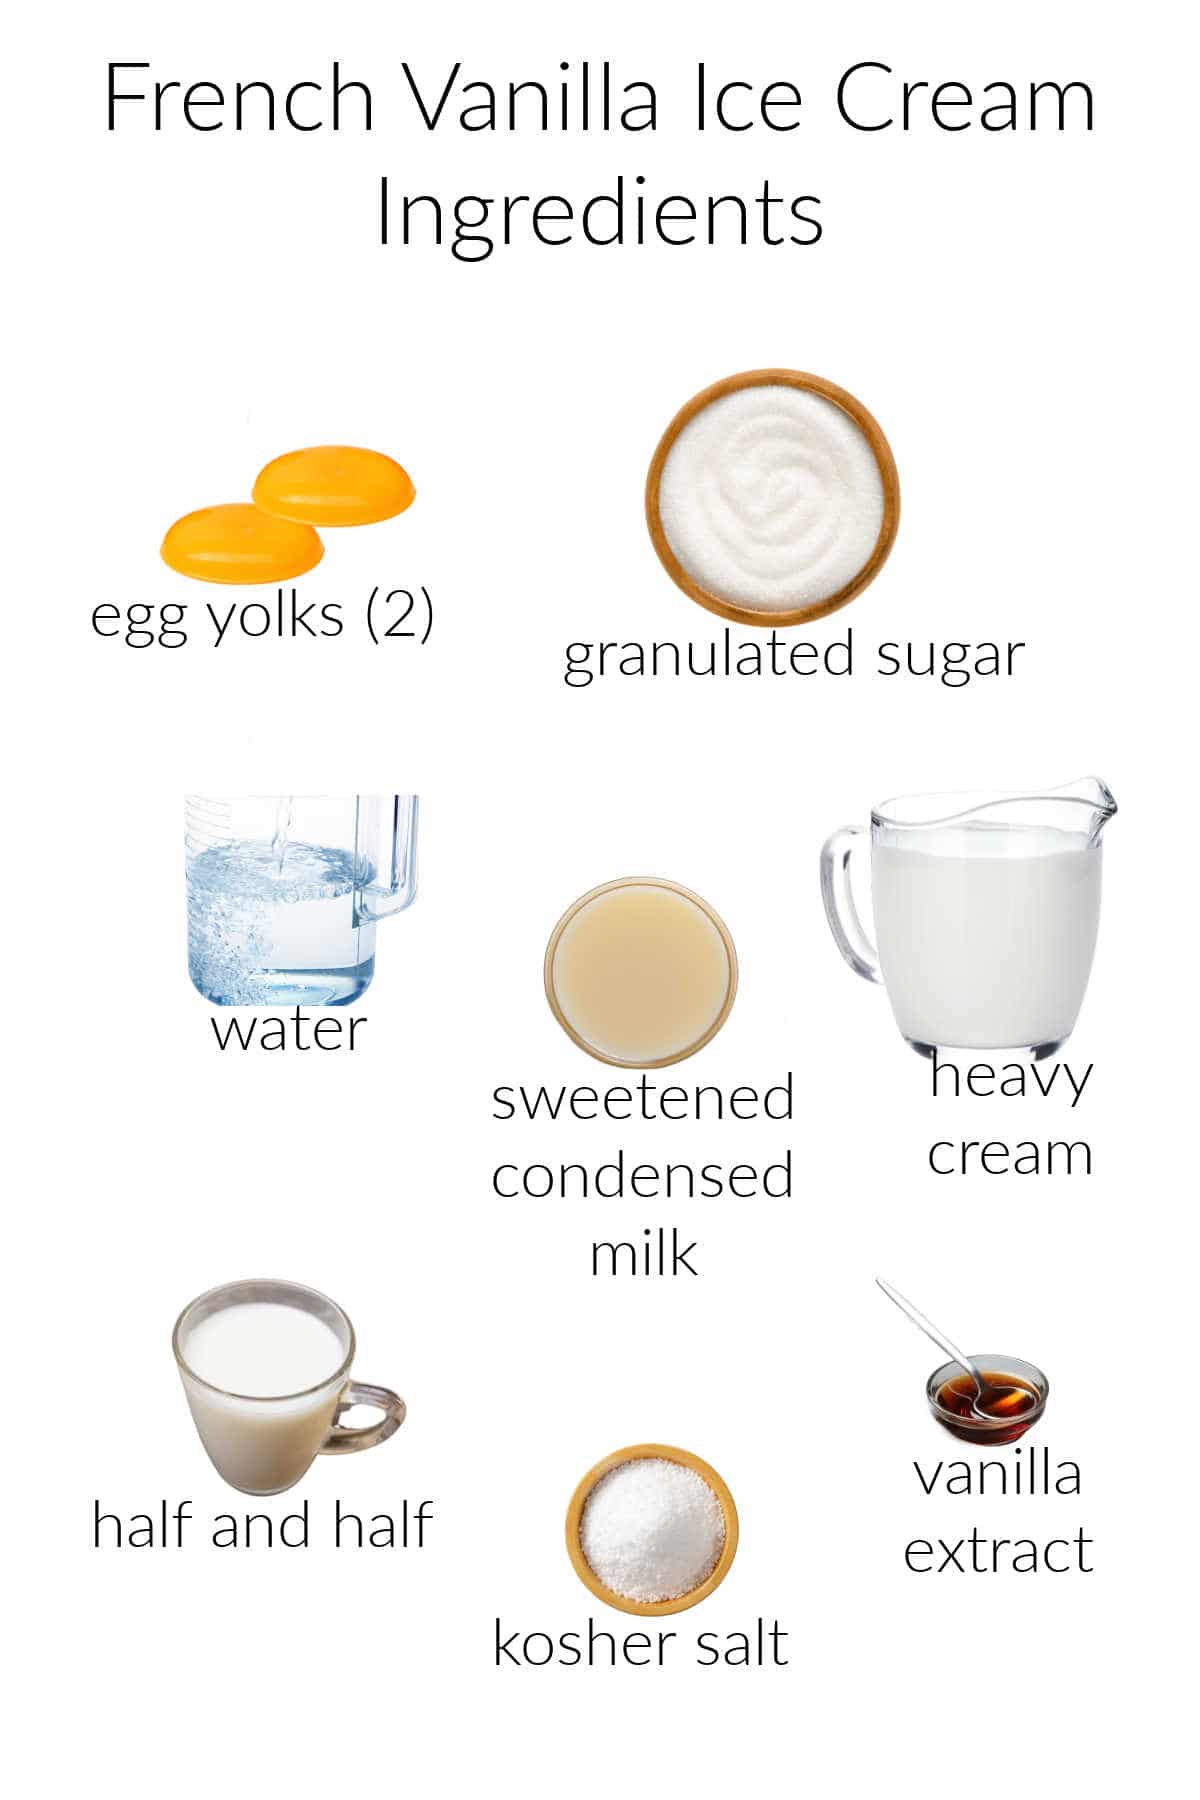 A collage of pictures of the ingredients needed for making French vanilla ice cream: egg yolks, sugar, water, sweetened condensed milk, heavy cream, half and half, salt, and vanilla.